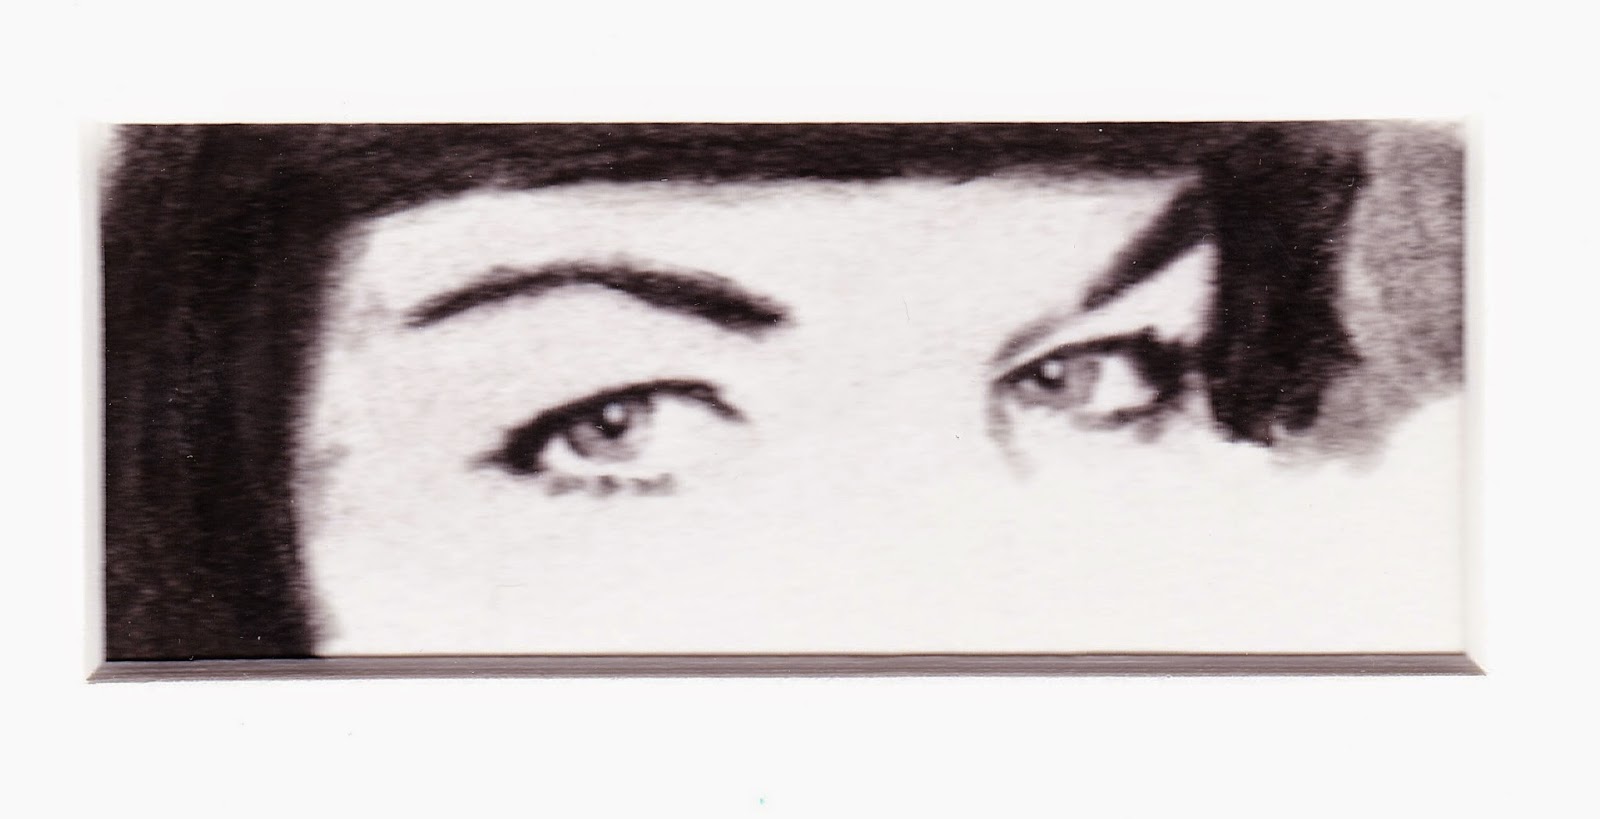 Eyes of Bettie Page by F. Lennox Campello